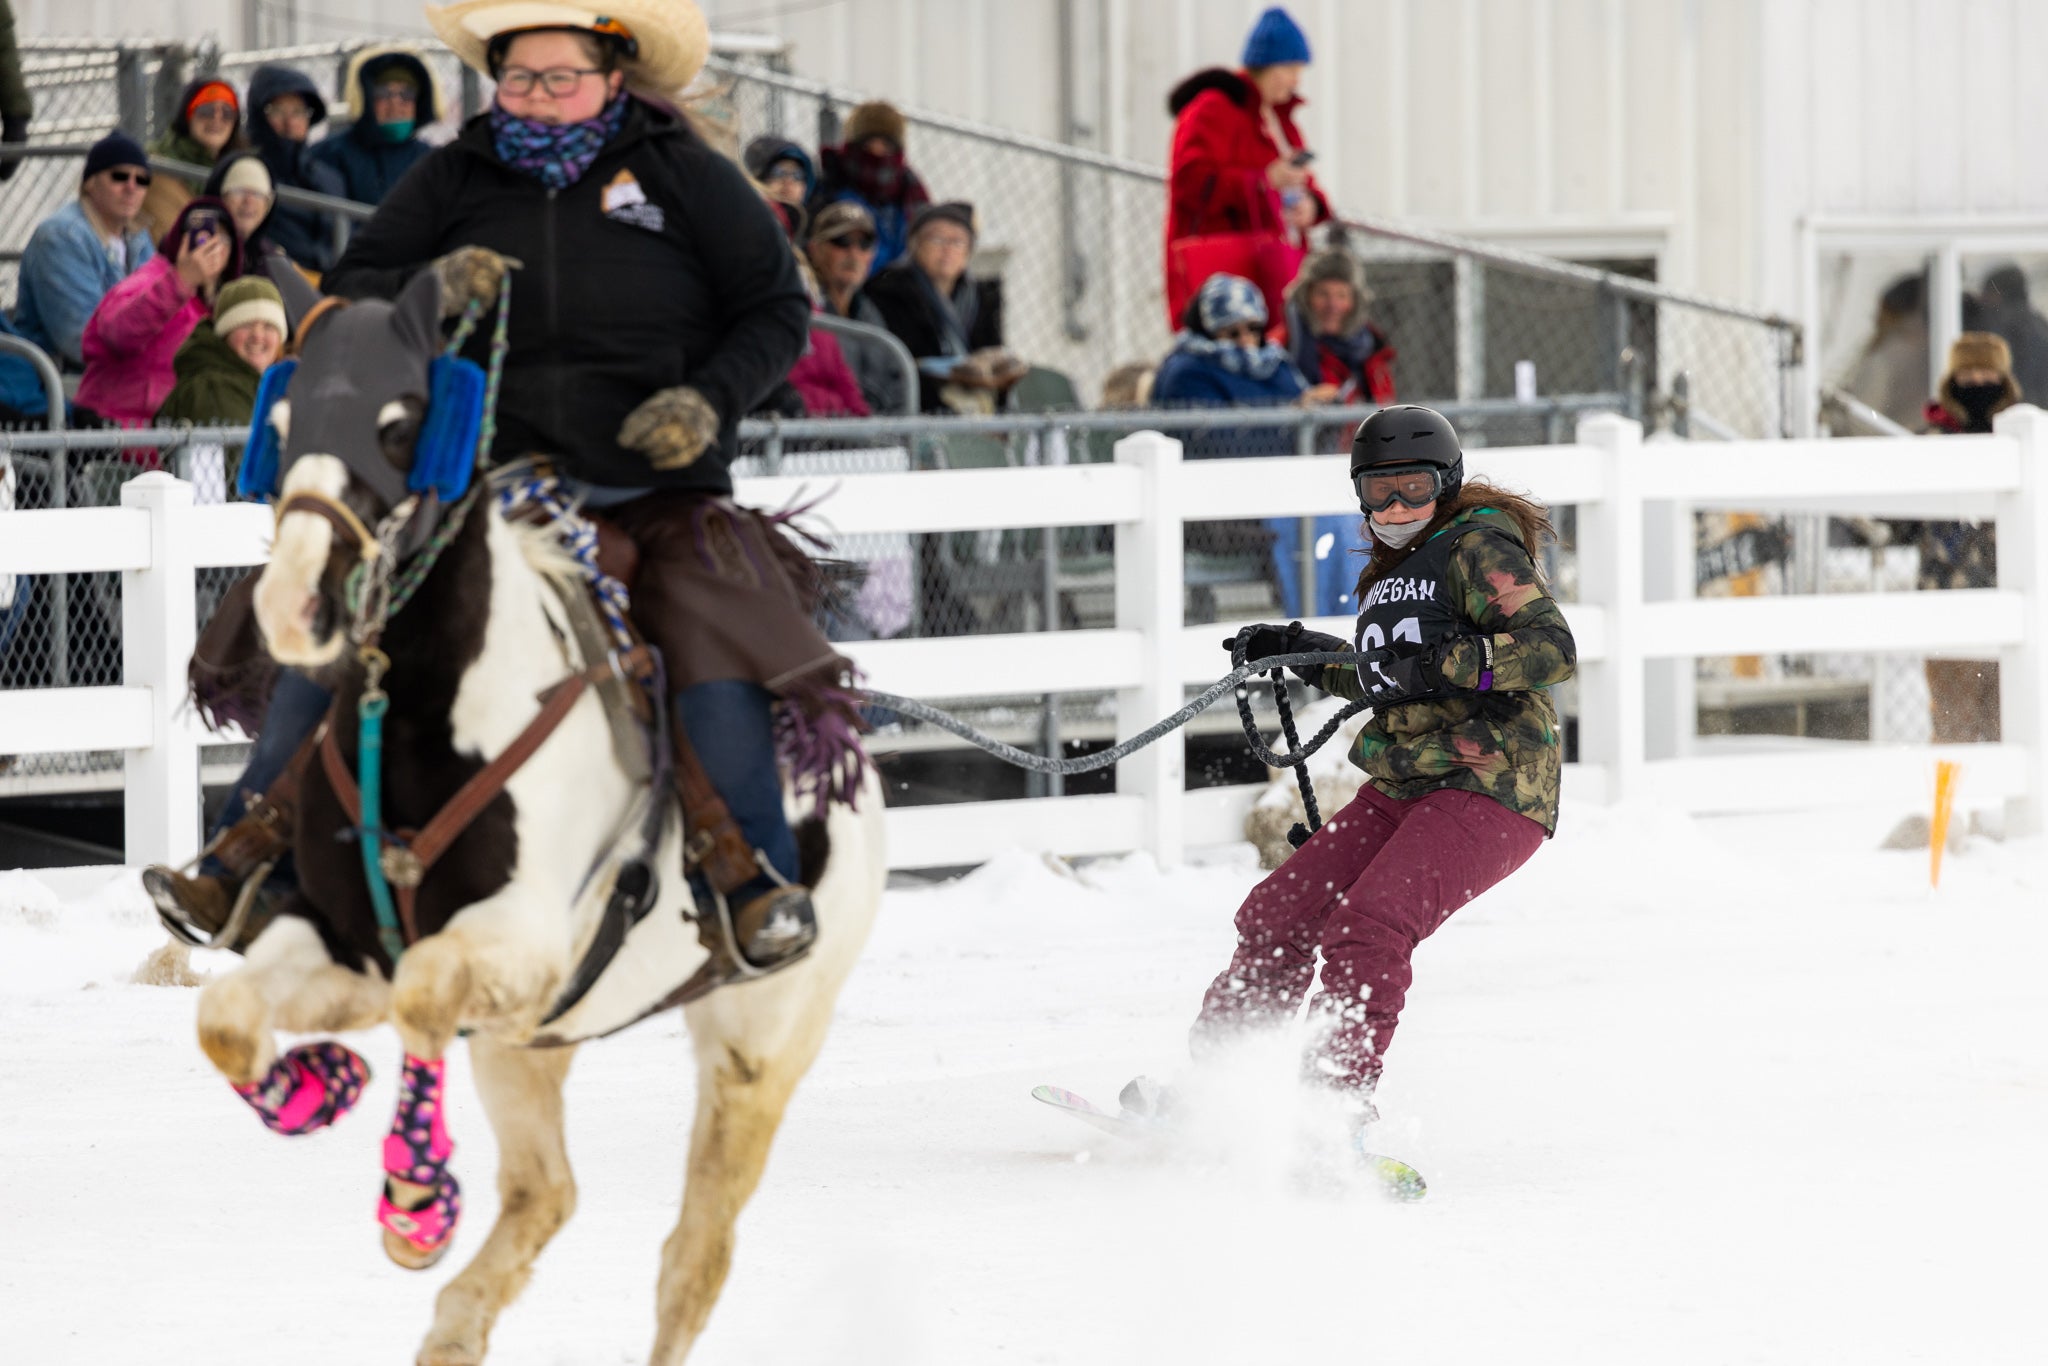 Skijoring & sleigh rides: Even with less snow, SnowFest a boon for